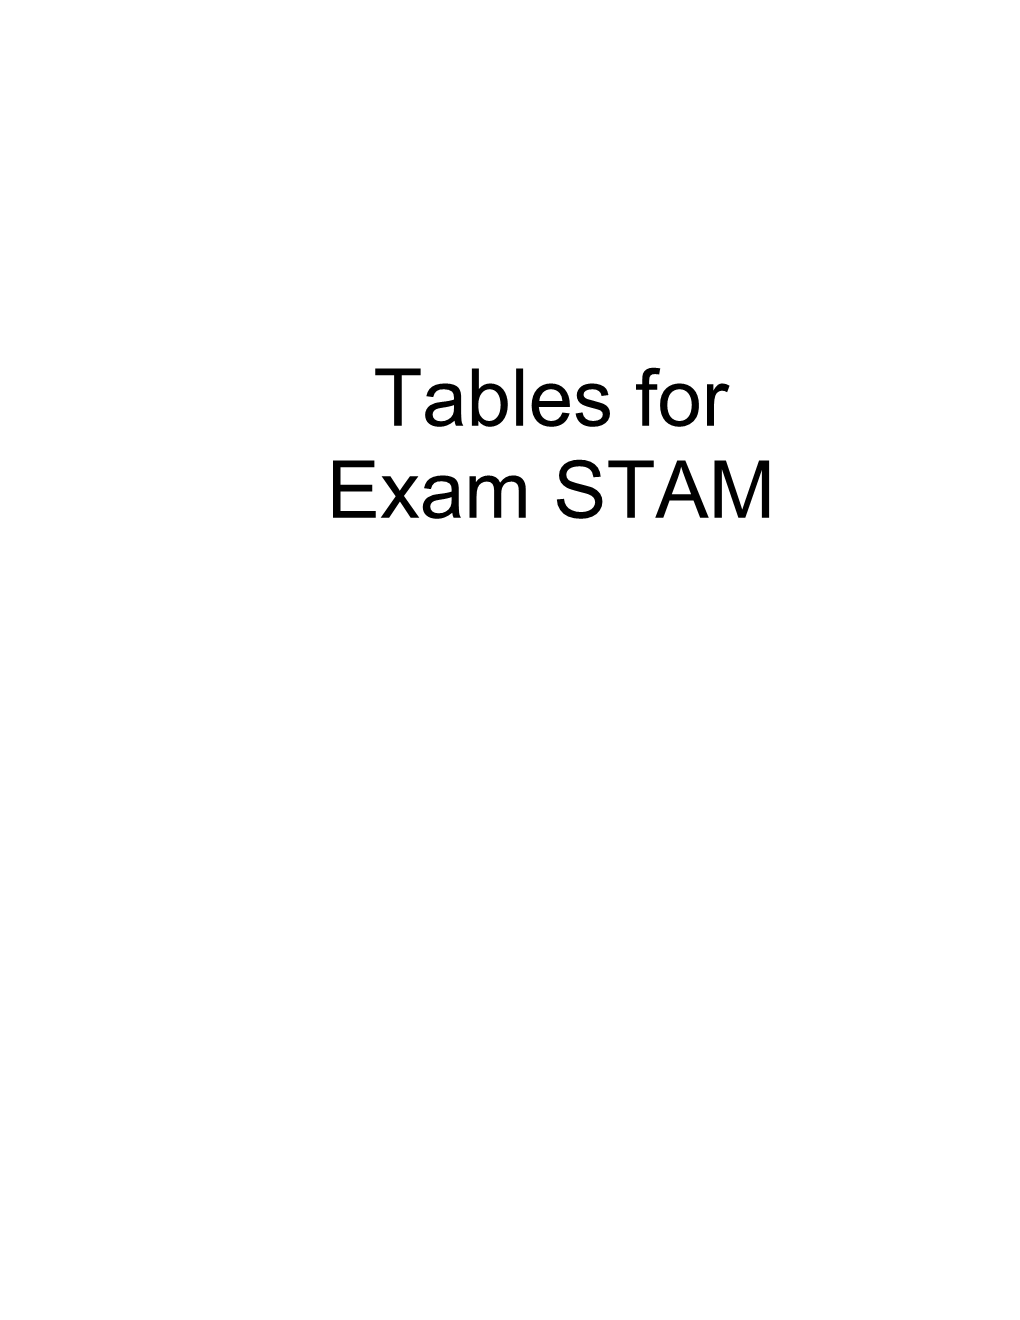 Tables for Exam STAM the Reading Material for Exam STAM Includes a Variety of Textbooks